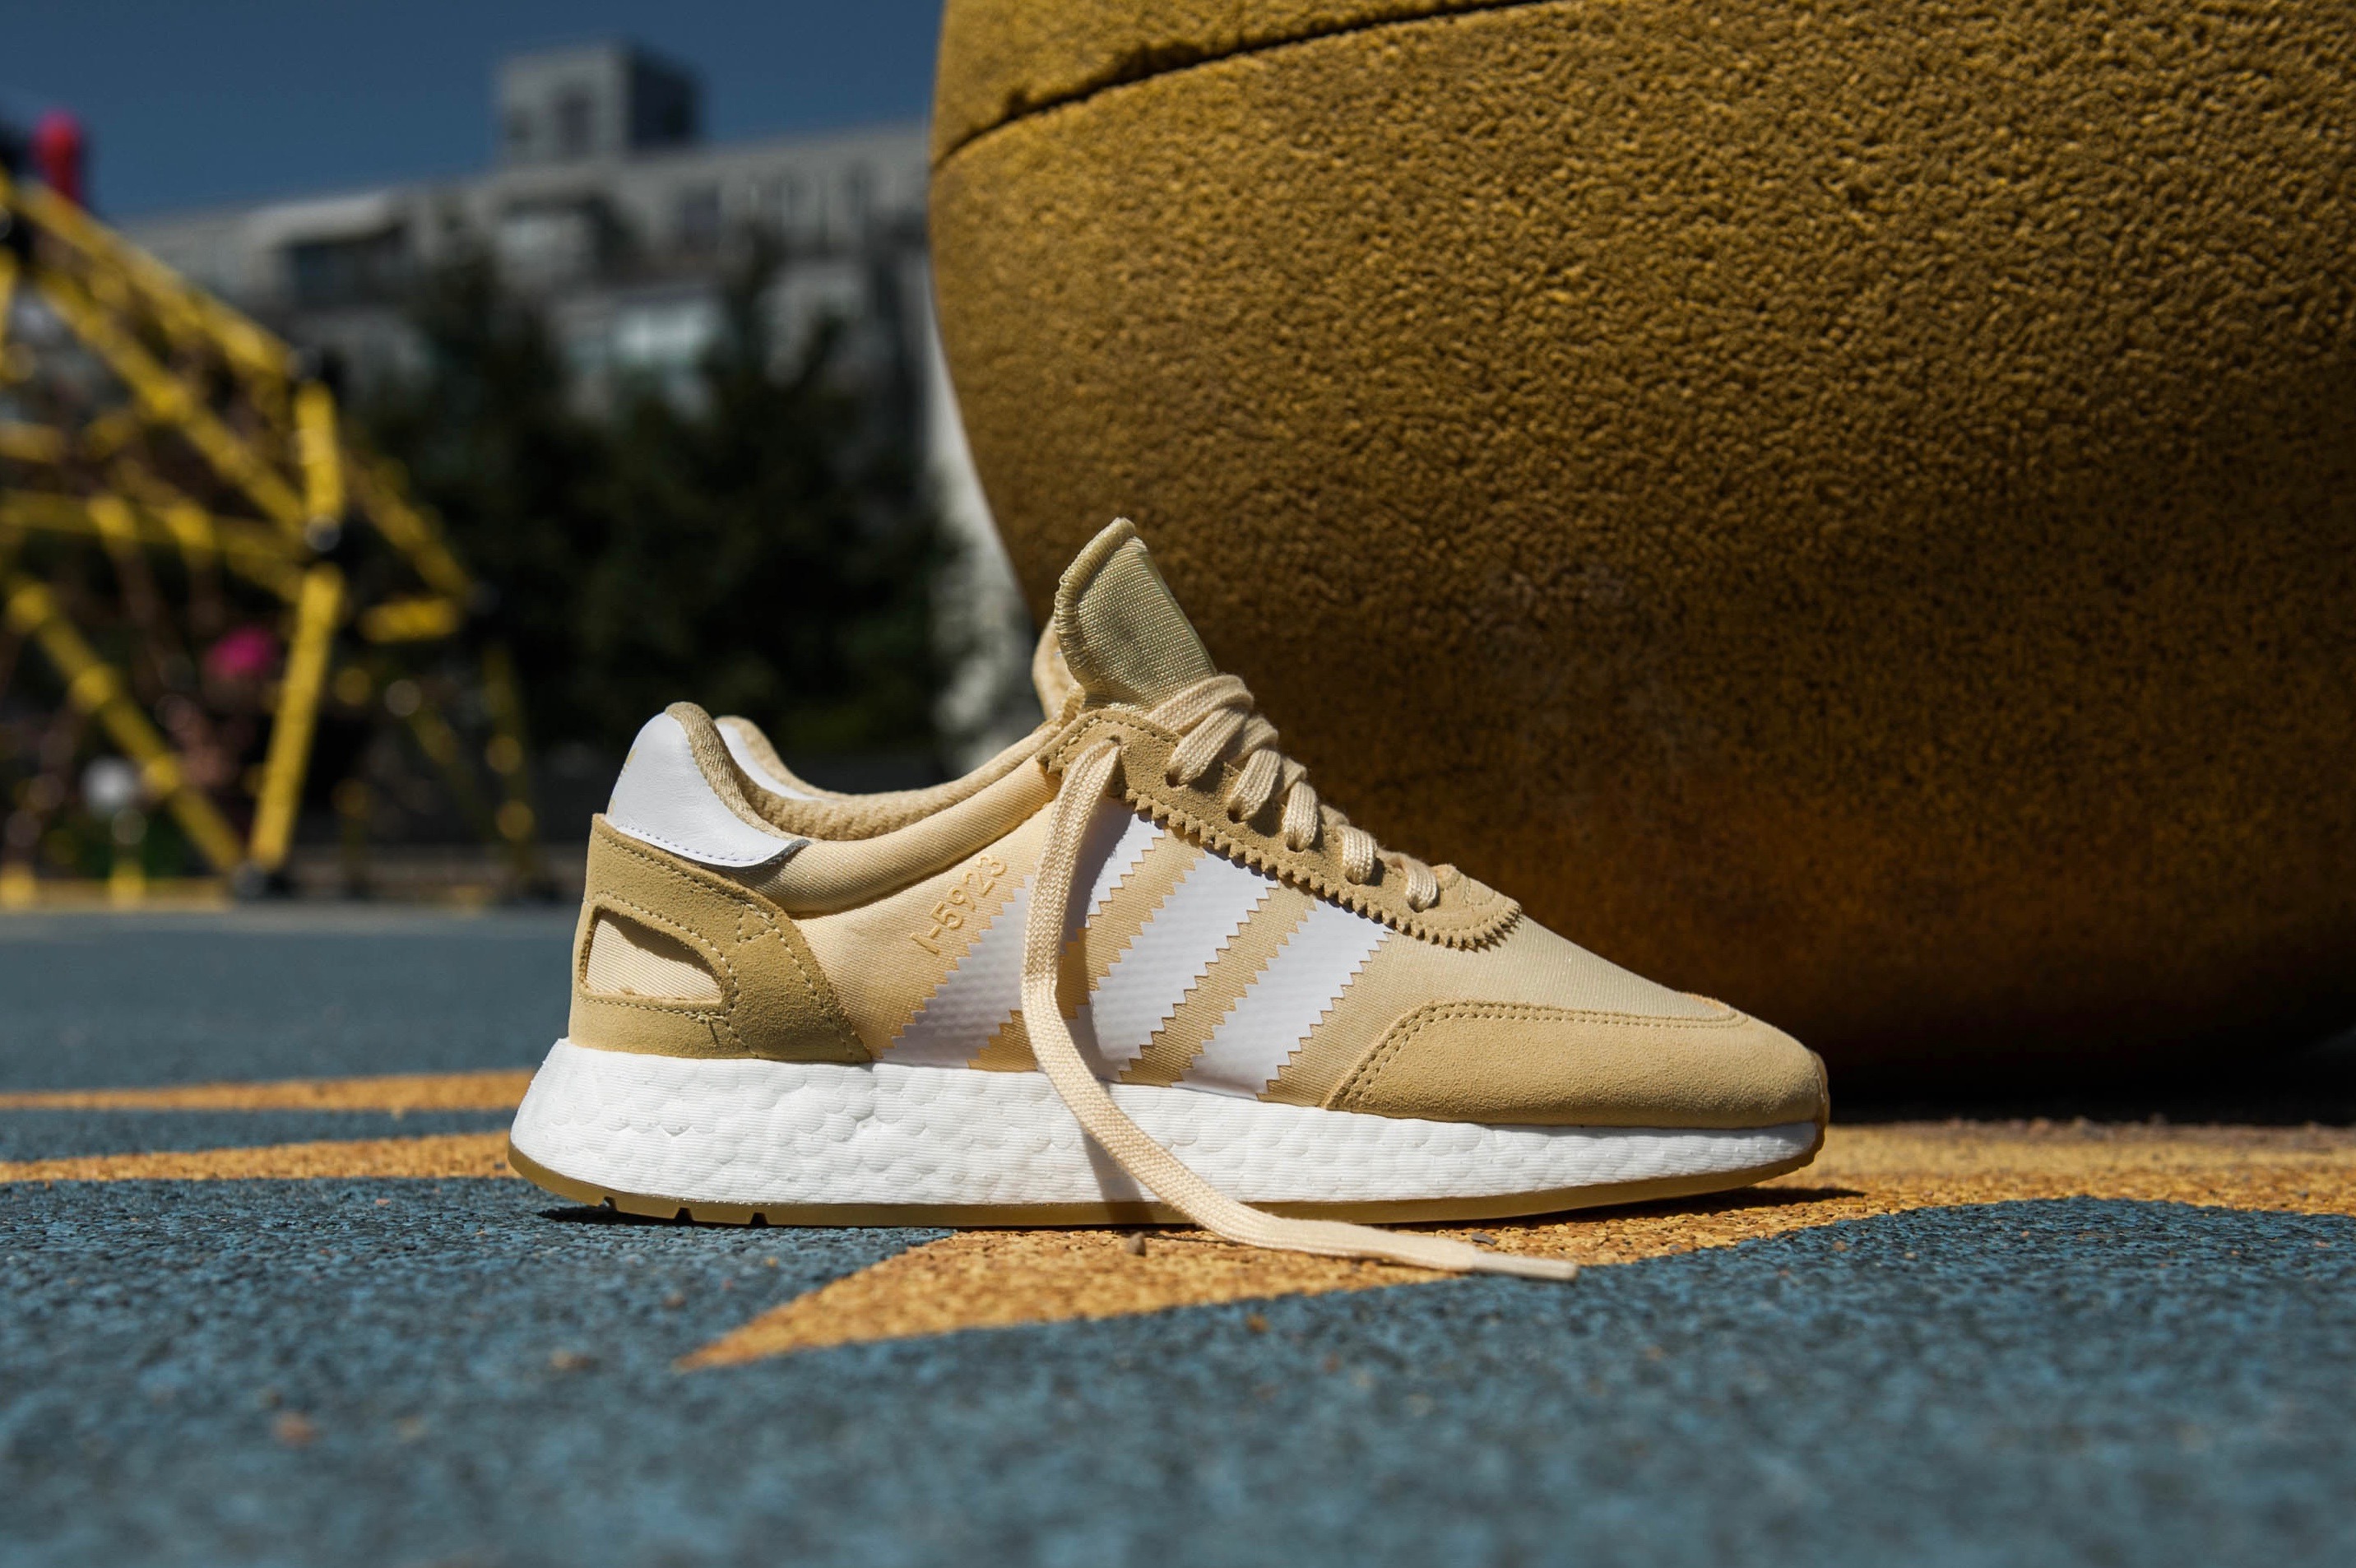 myg Delegeret gift adidas Originals I-5923 W – Clear Yellow / Cloud White / Gum – STASP